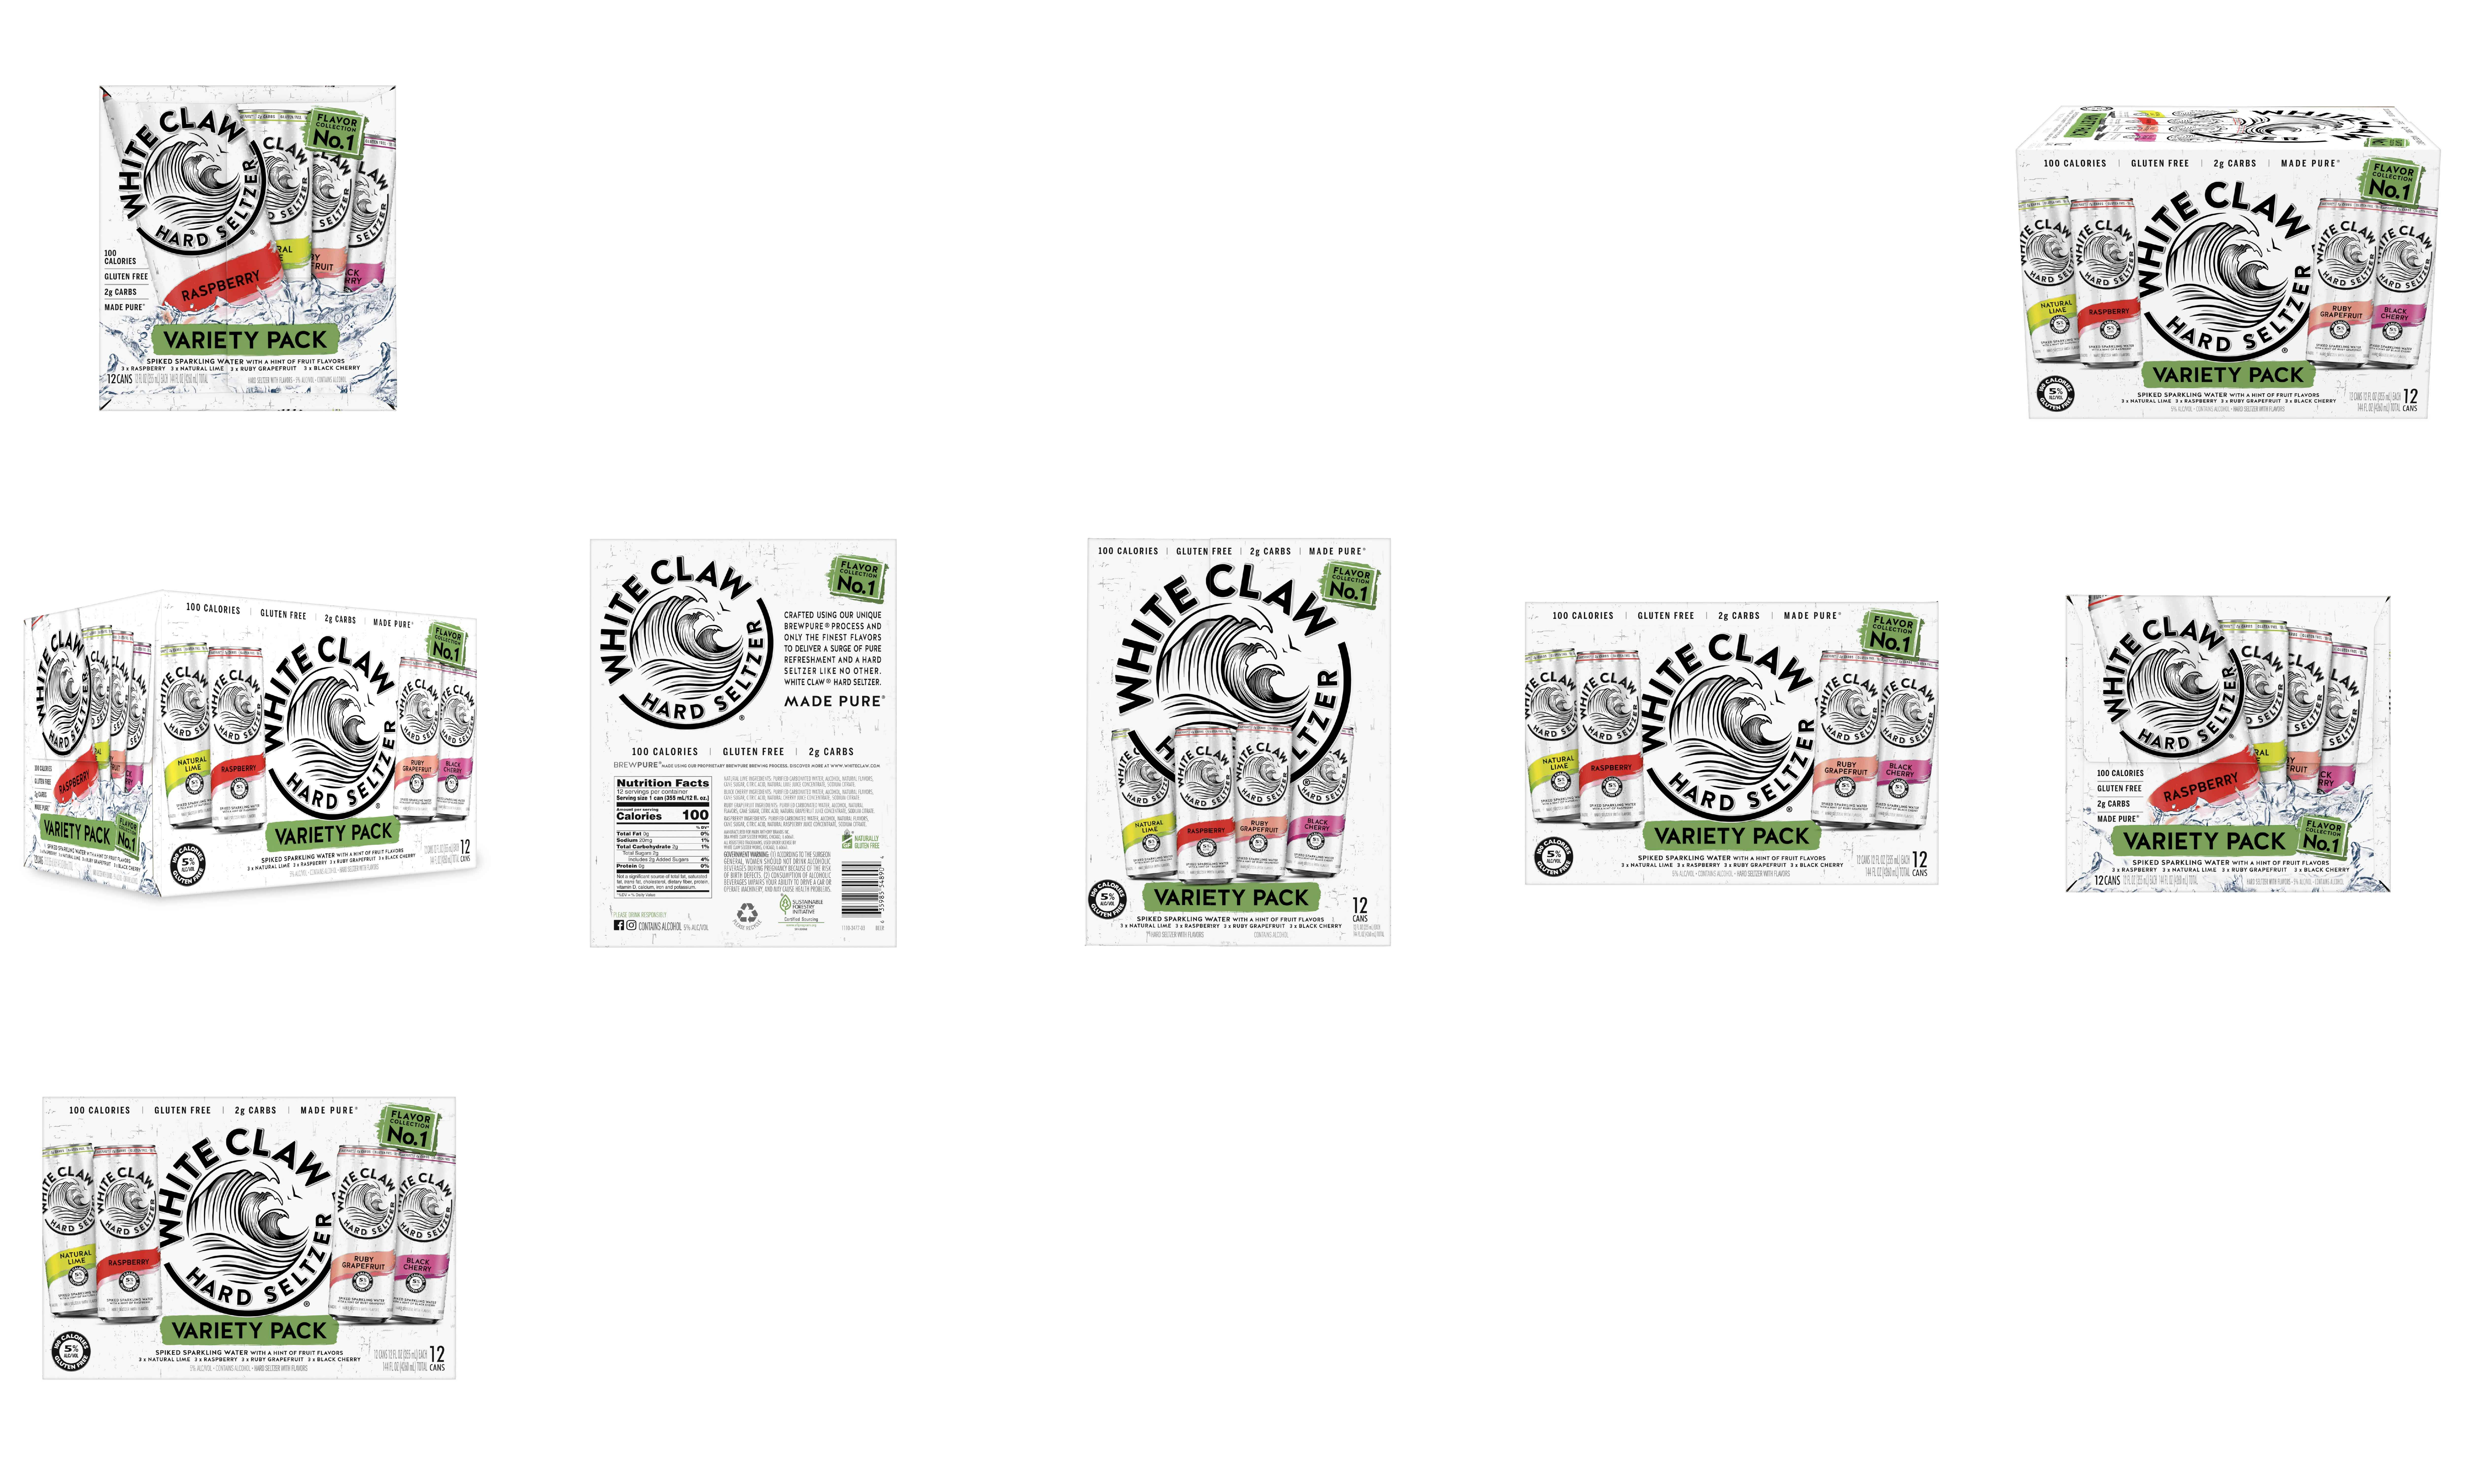 White Claw Hard Seltzer, Variety Pack - 12 pack, 12 fl oz cans